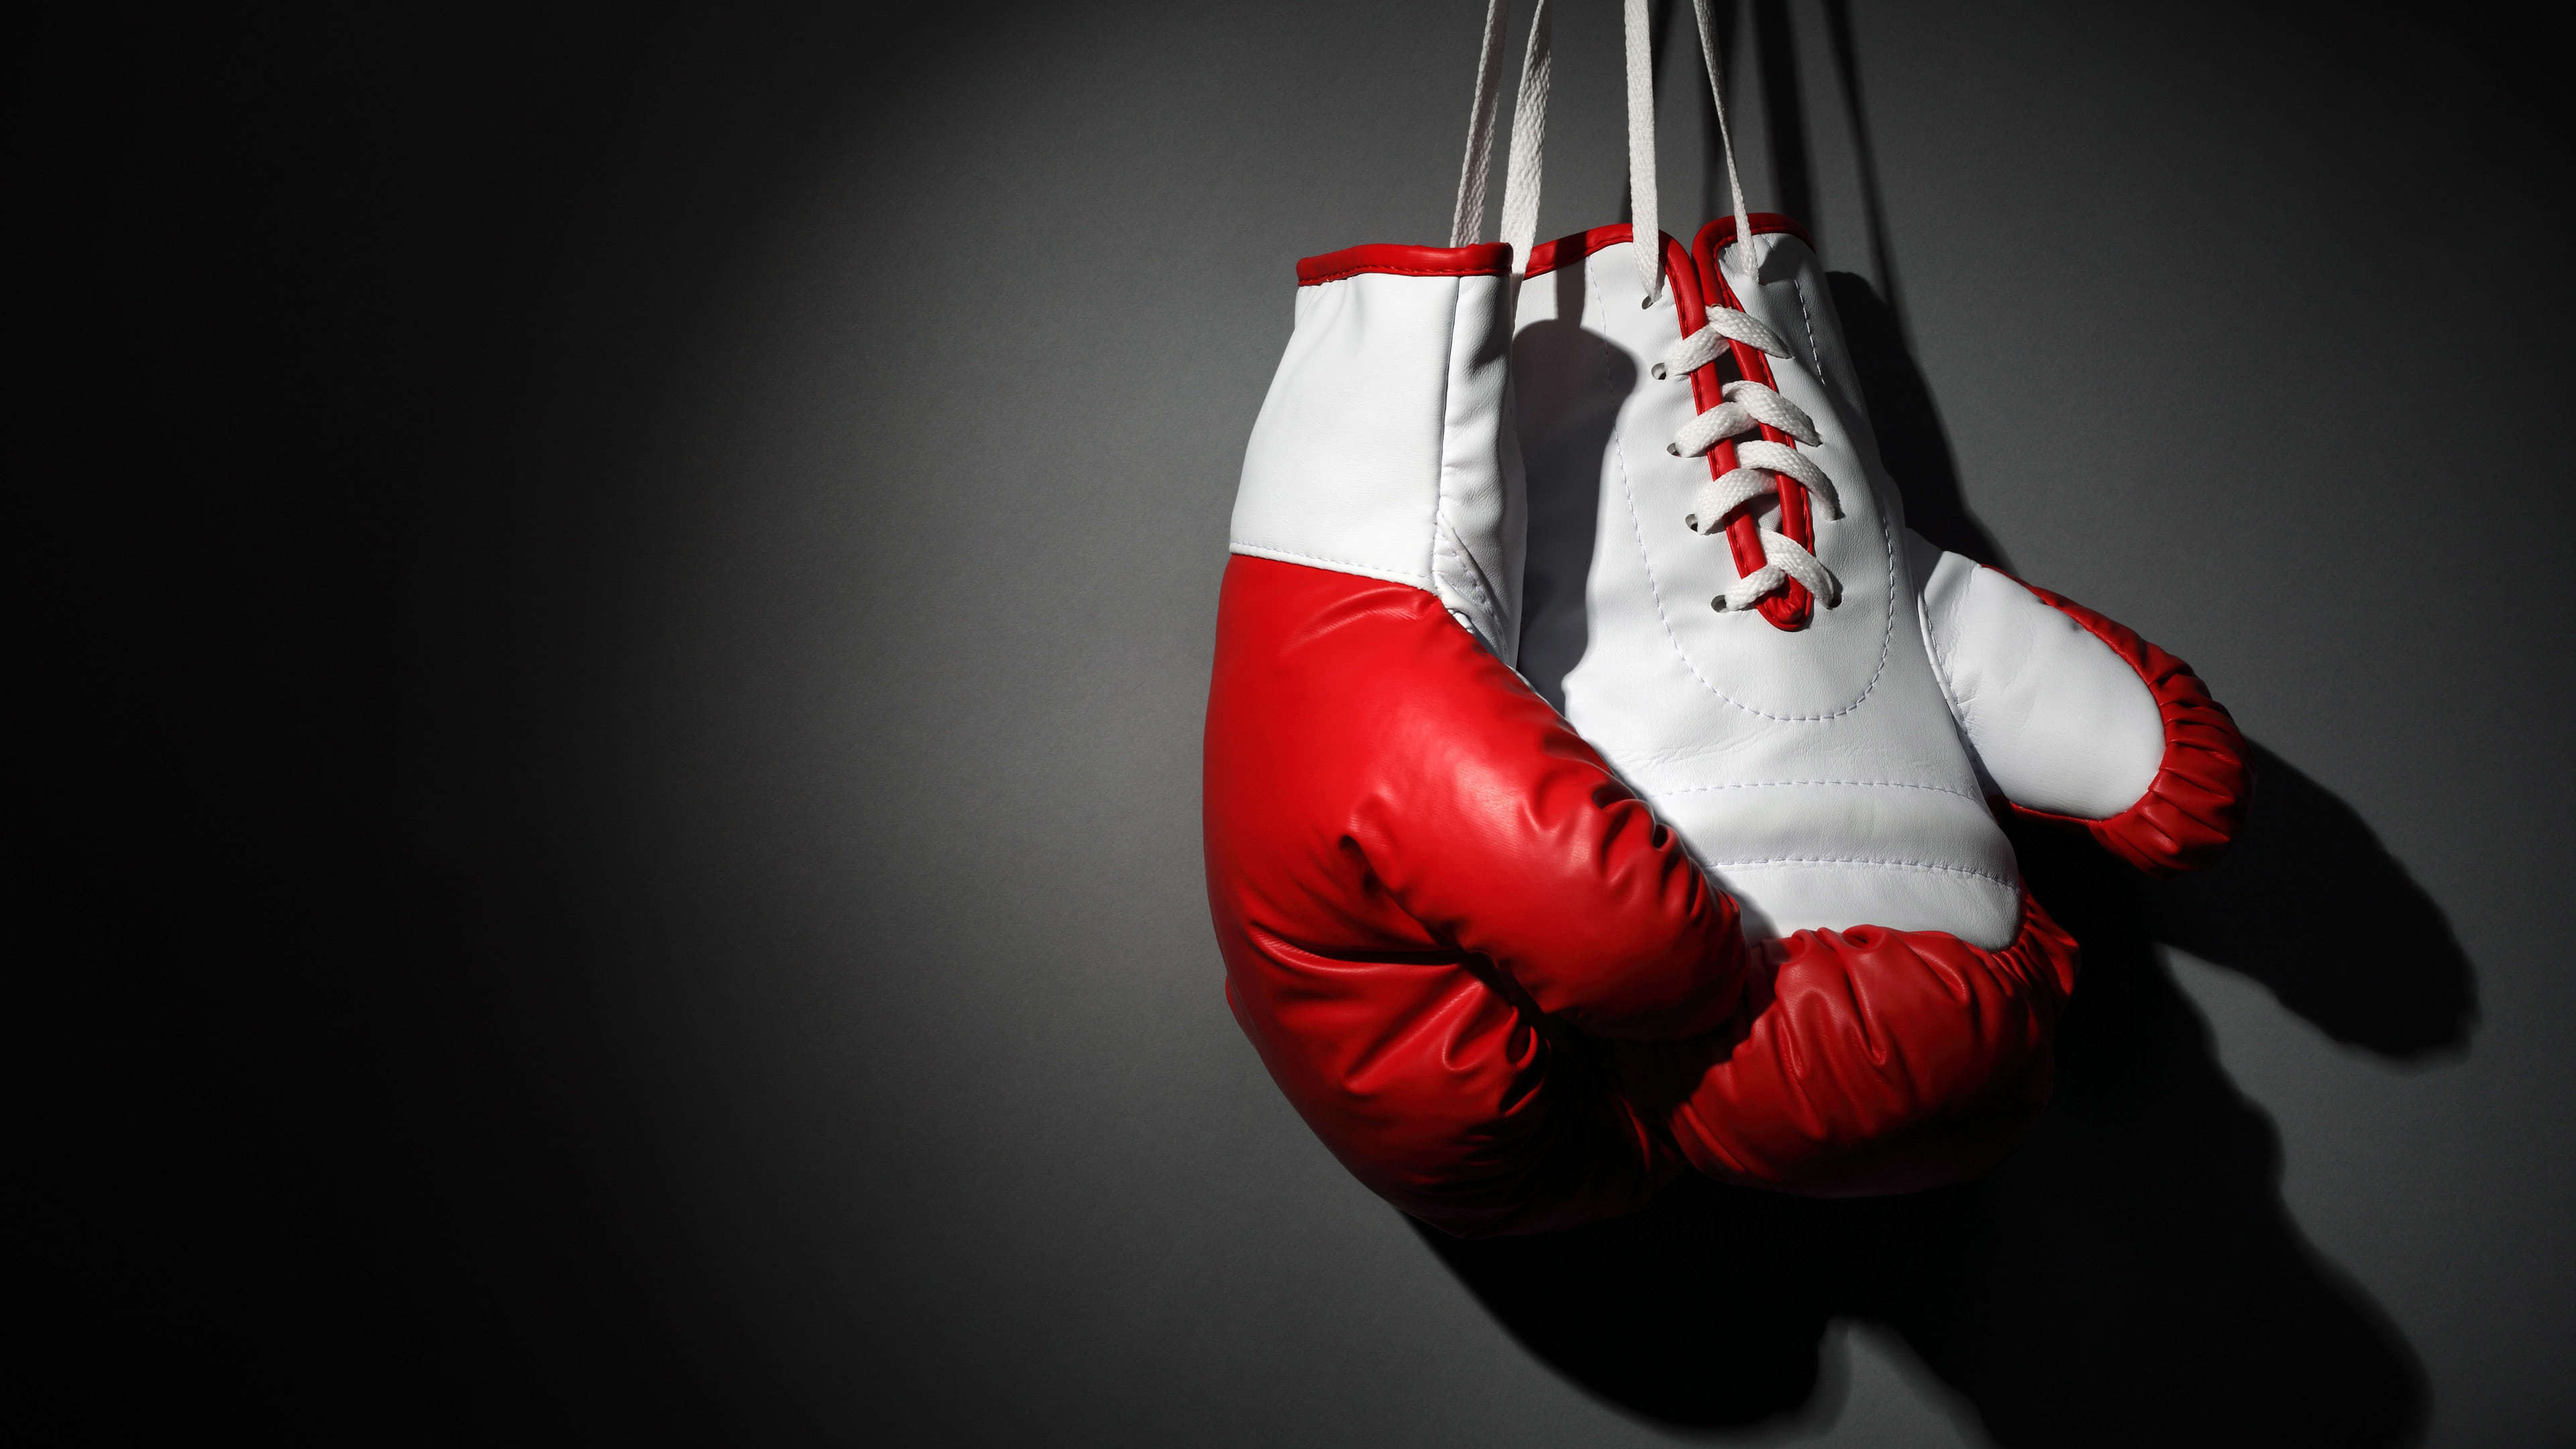 Combat Sports: Boxing Gloves, Athlete's Hands Protection, Gloves Approved by International Boxing Association. 3840x2160 4K Wallpaper.